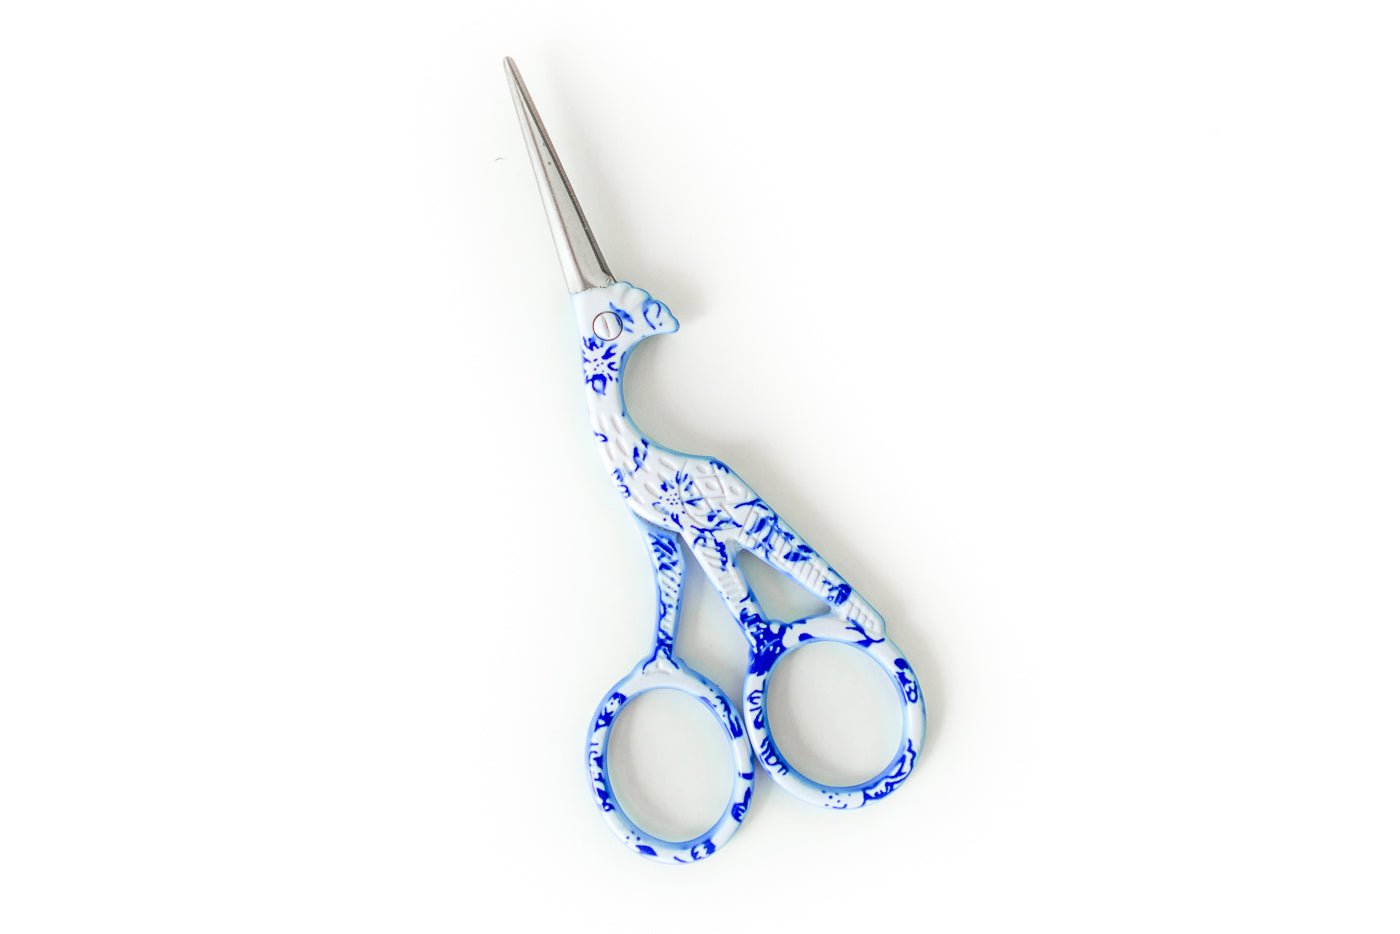 Stainless Steel Crane Scissors Eyebrow Trimming Scissors Electroplating  Colorful Small Scissors 